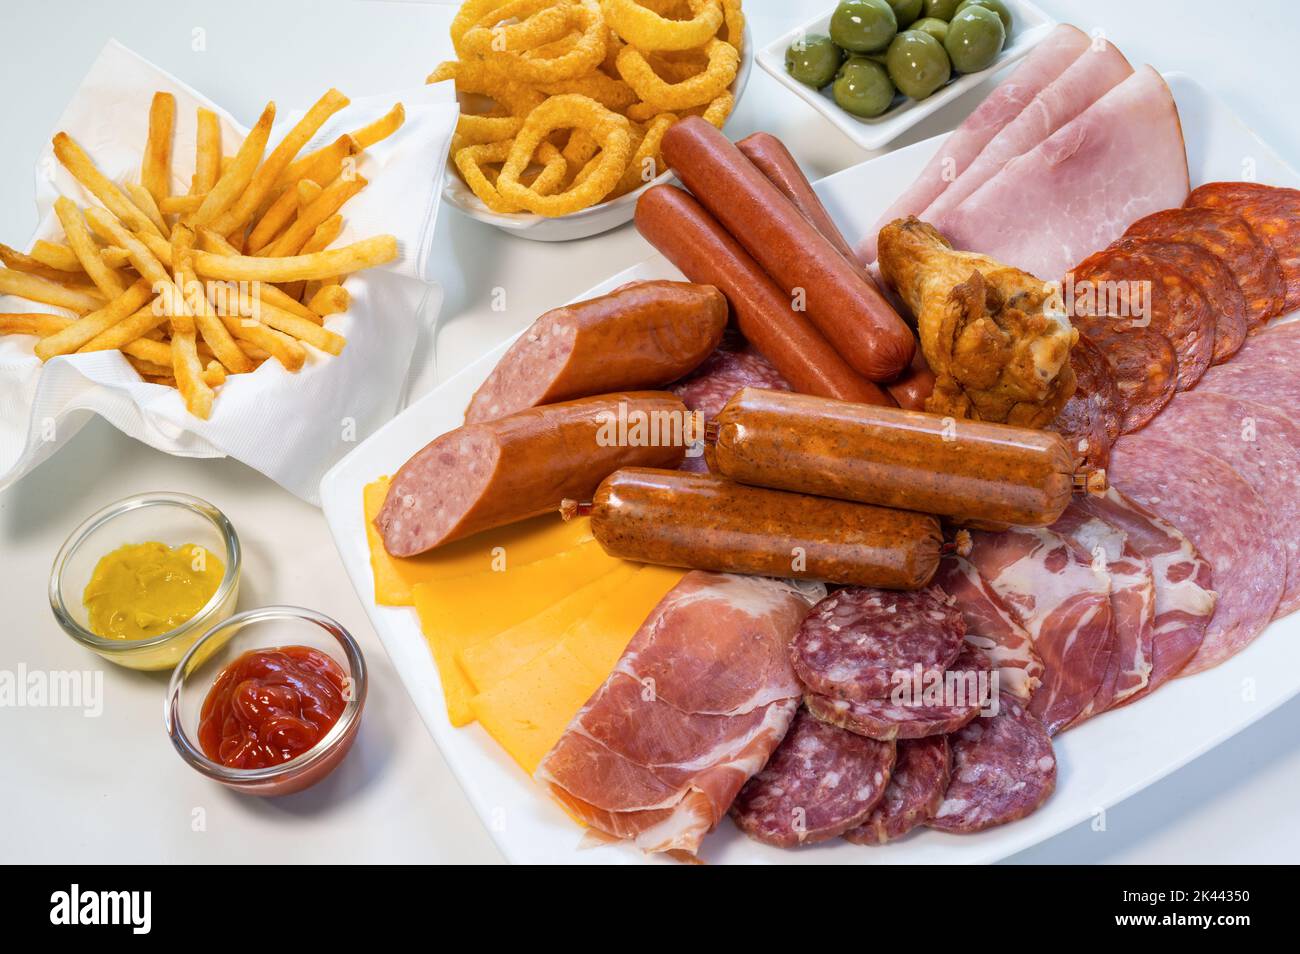 Assorted unhealthy processed and fried foods on table Stock Photo